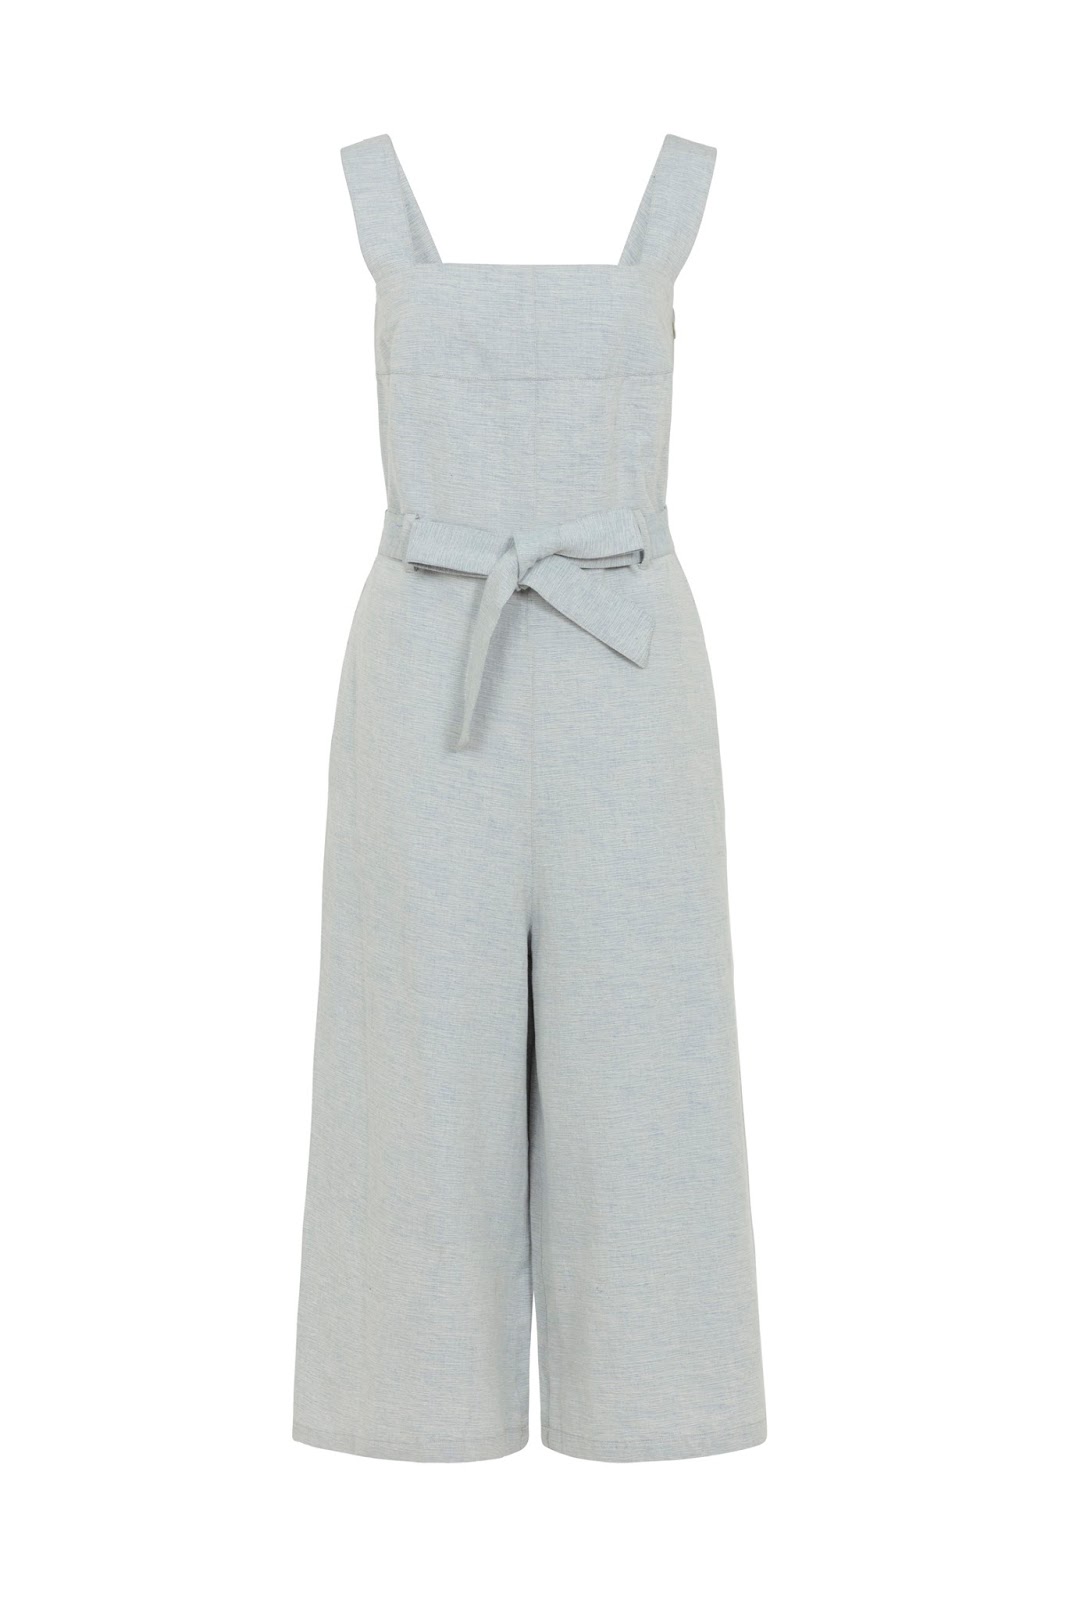 8 Ethical + Minimalist Spring Pieces | Style Wise | Ethical Fashion ...